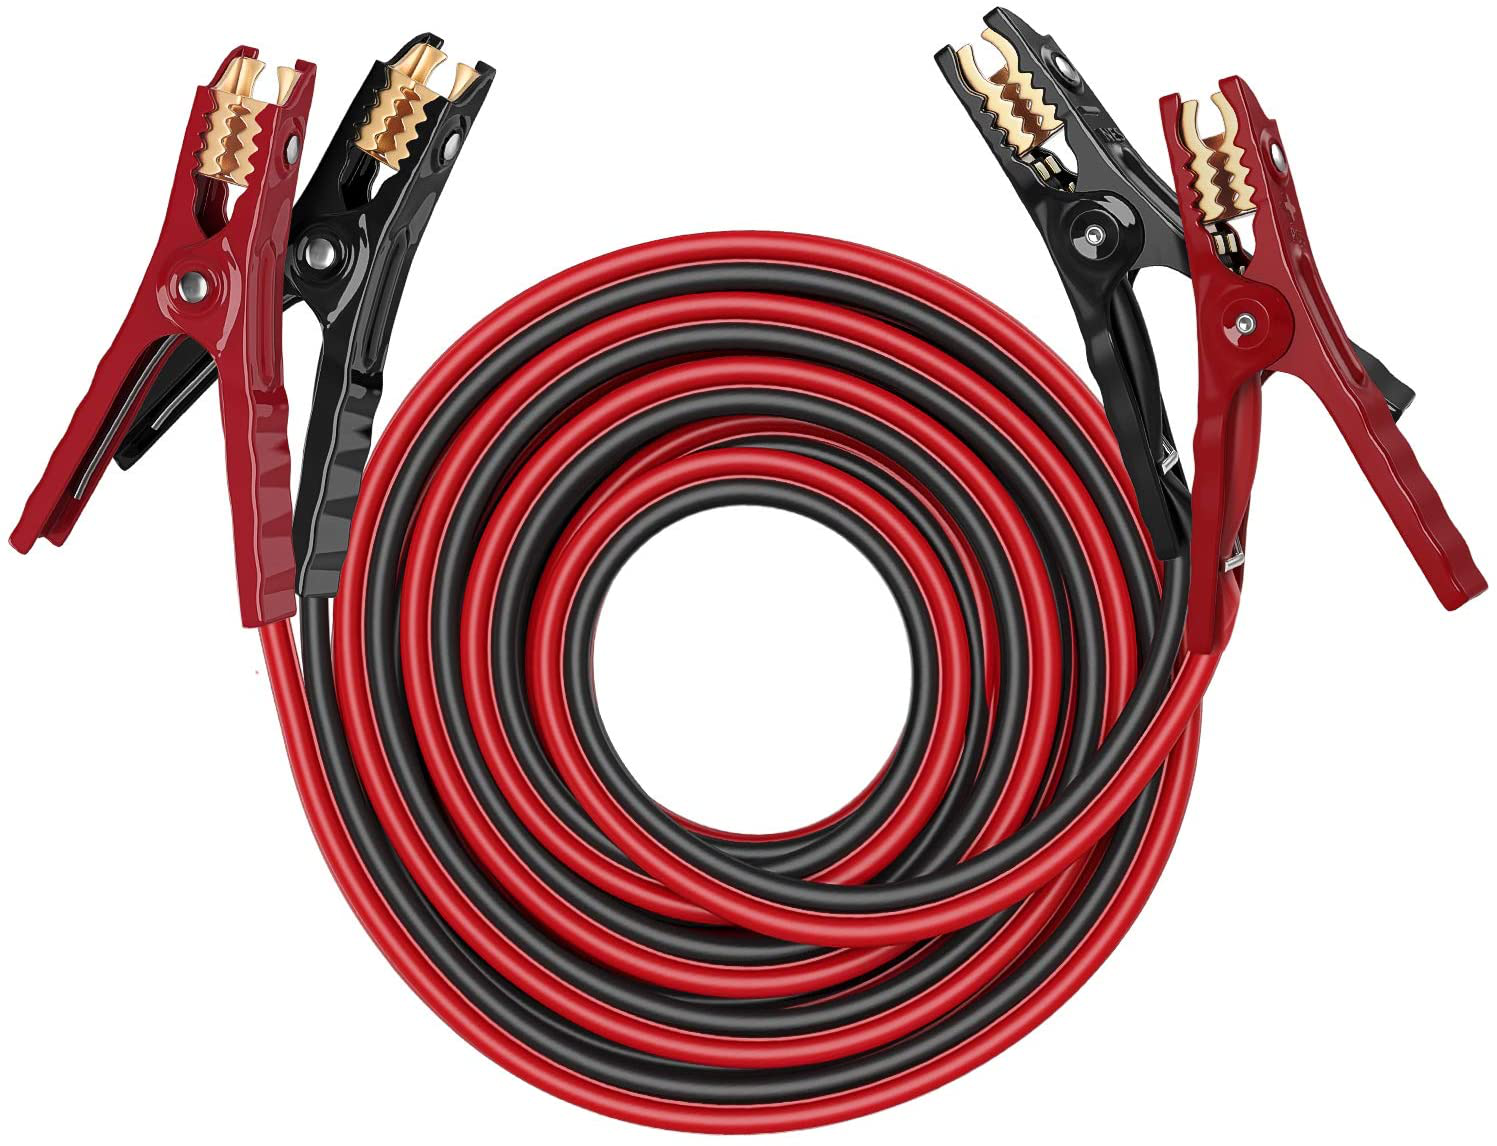 THIKPO G130 Jumper Cables12V & 24V Booster Cables for Car, SUV and Trucks with up to 8-Liter Gasoline and 6-Liter Diesel Engines